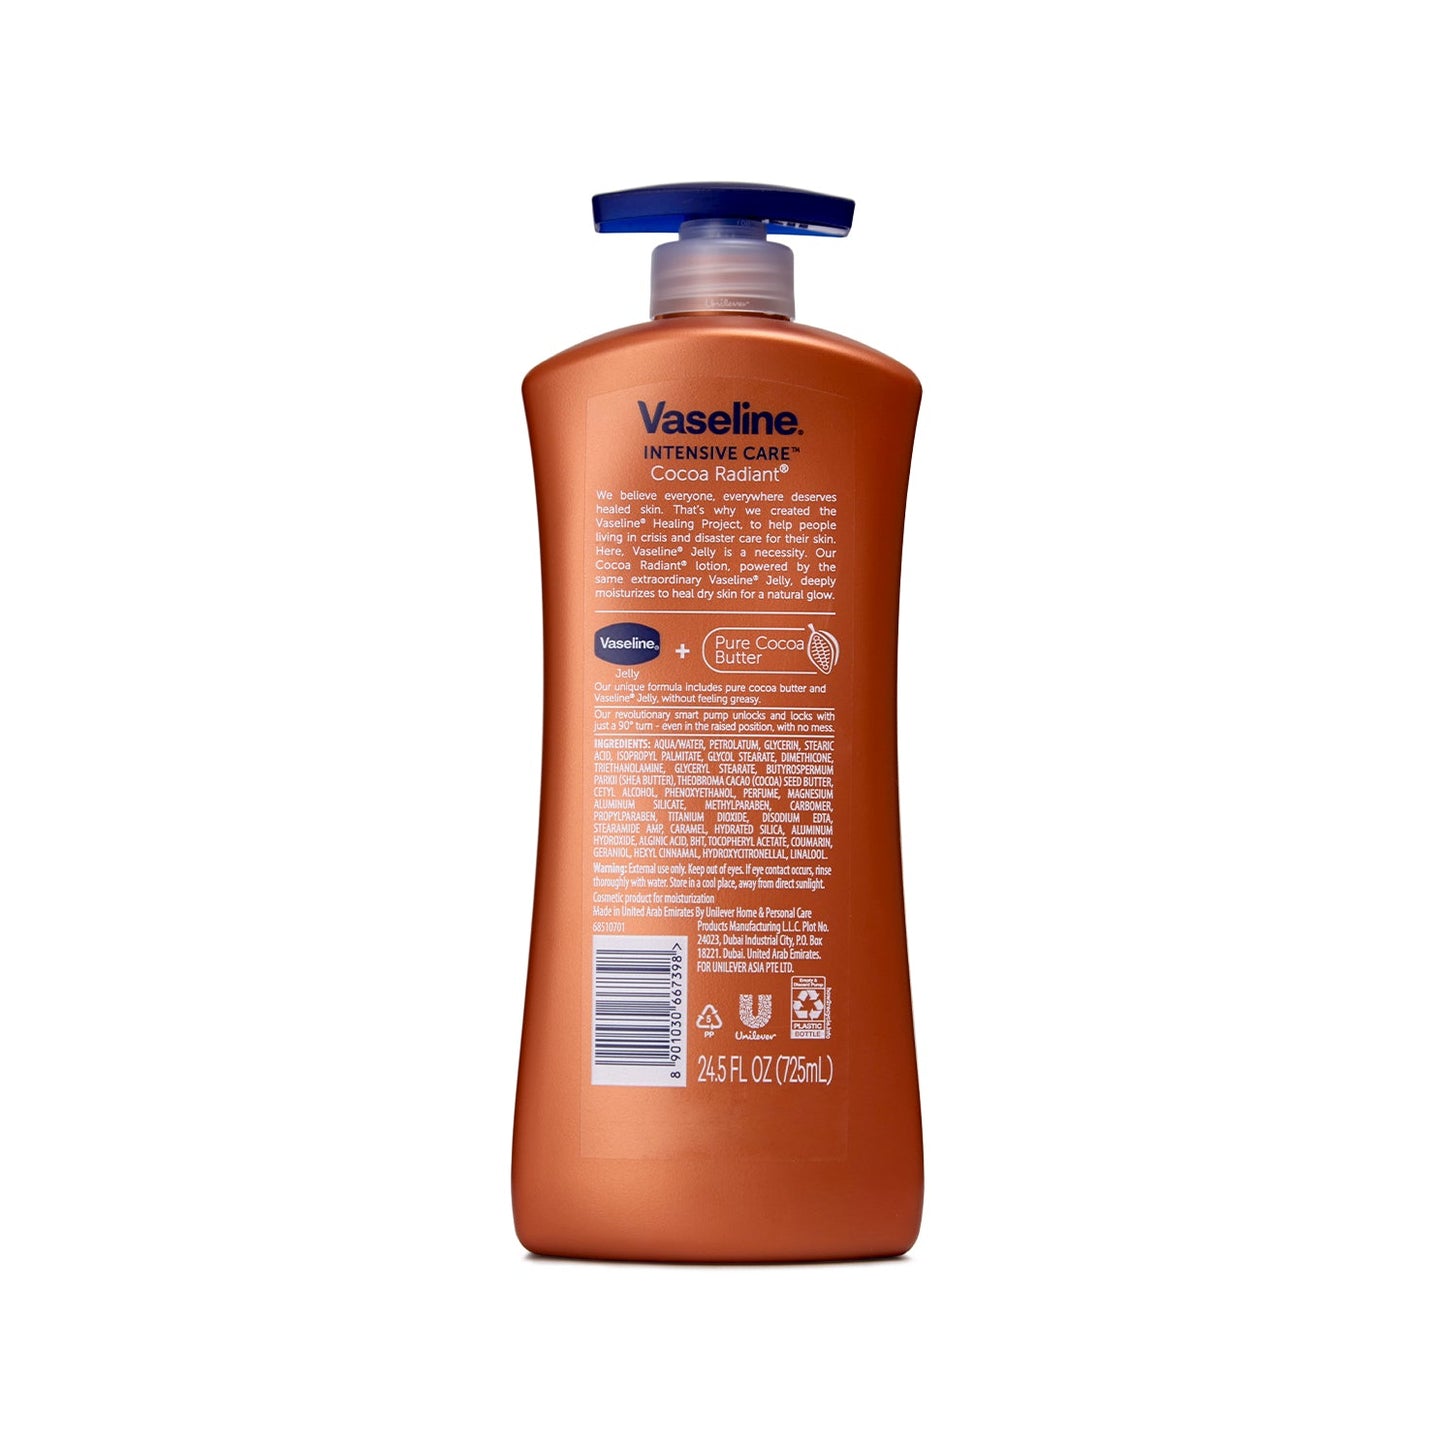 Sữa Dưỡng Thể Vaseline Intensive Care Cocoa Glow 725ml